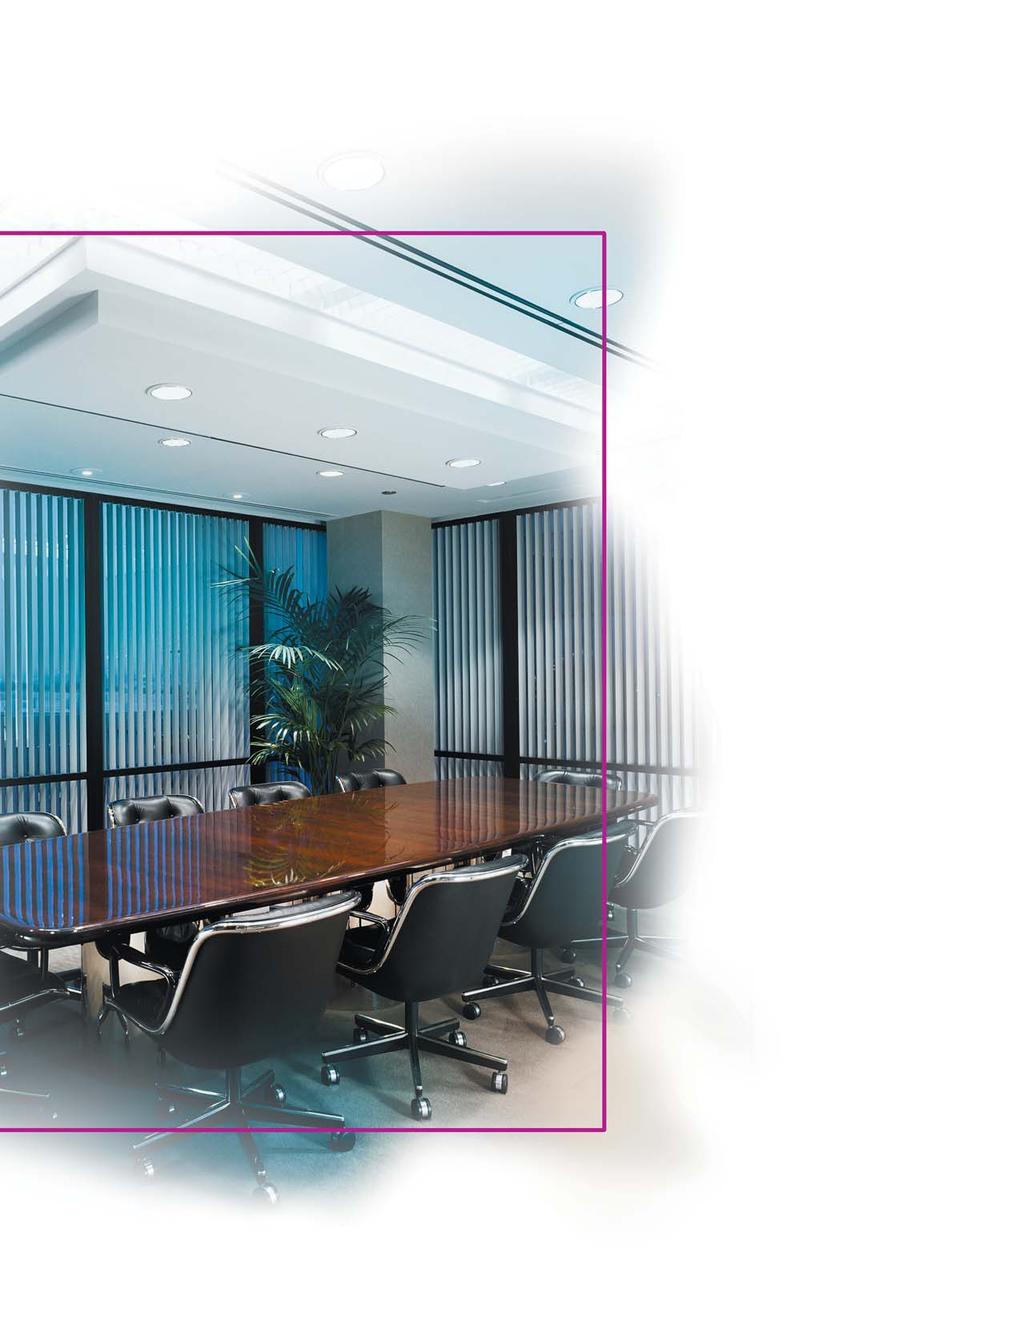 Let your Fluorescents Flourish From client meetings to strategy sessions, put your business on